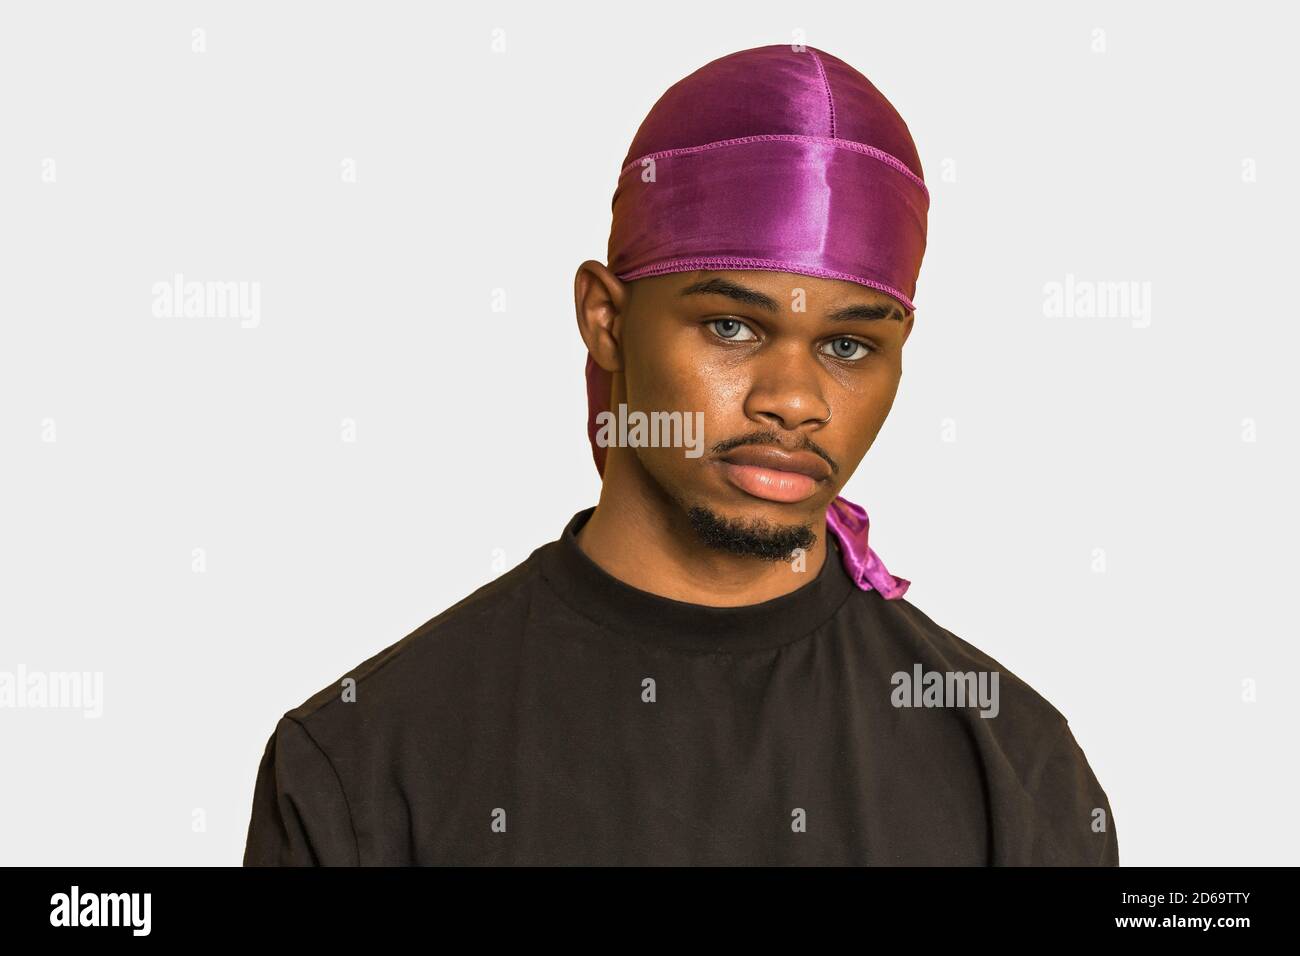 African American man in black t shirt and stylish headgear looking at camera against gray background. Stock Photo